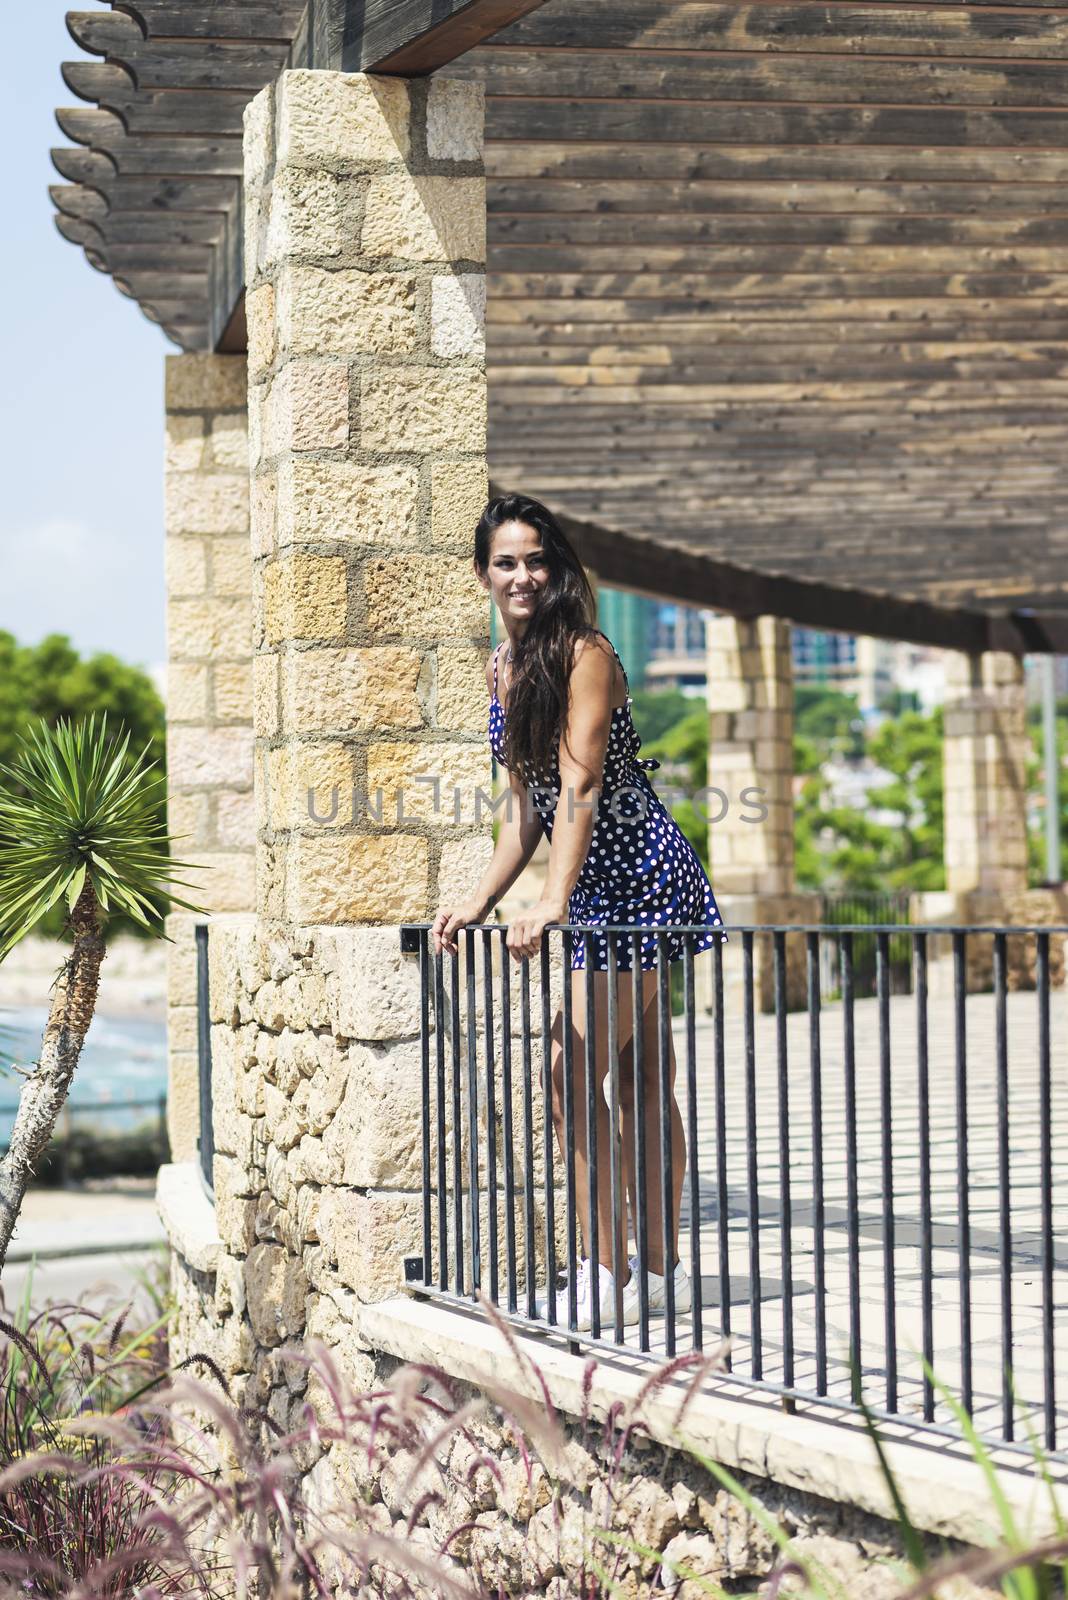 Beautiful smiling woman in blue dress leaning on fence while looking away